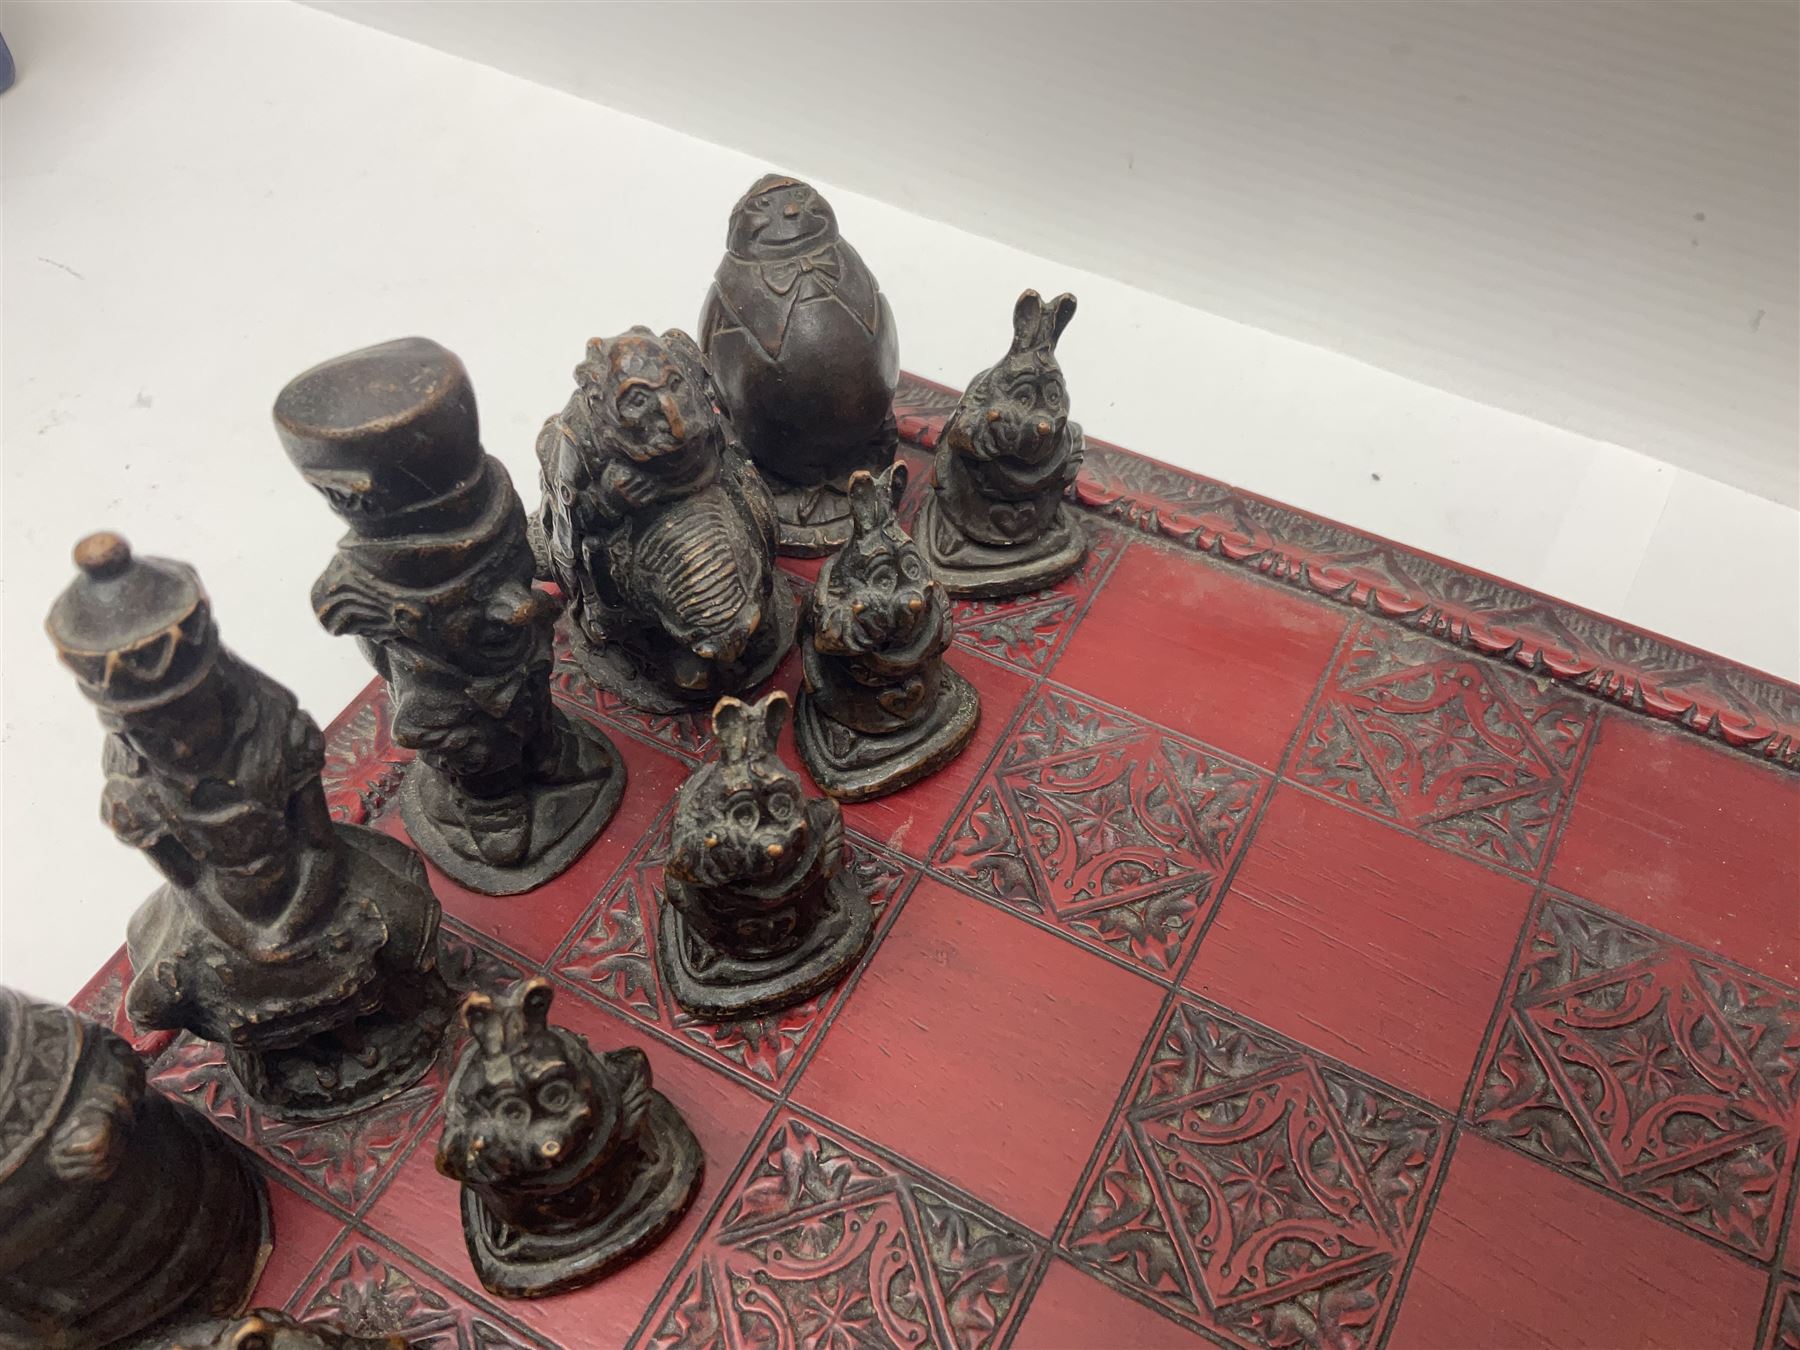 Alice in Wonderland themed chess set - Image 5 of 11